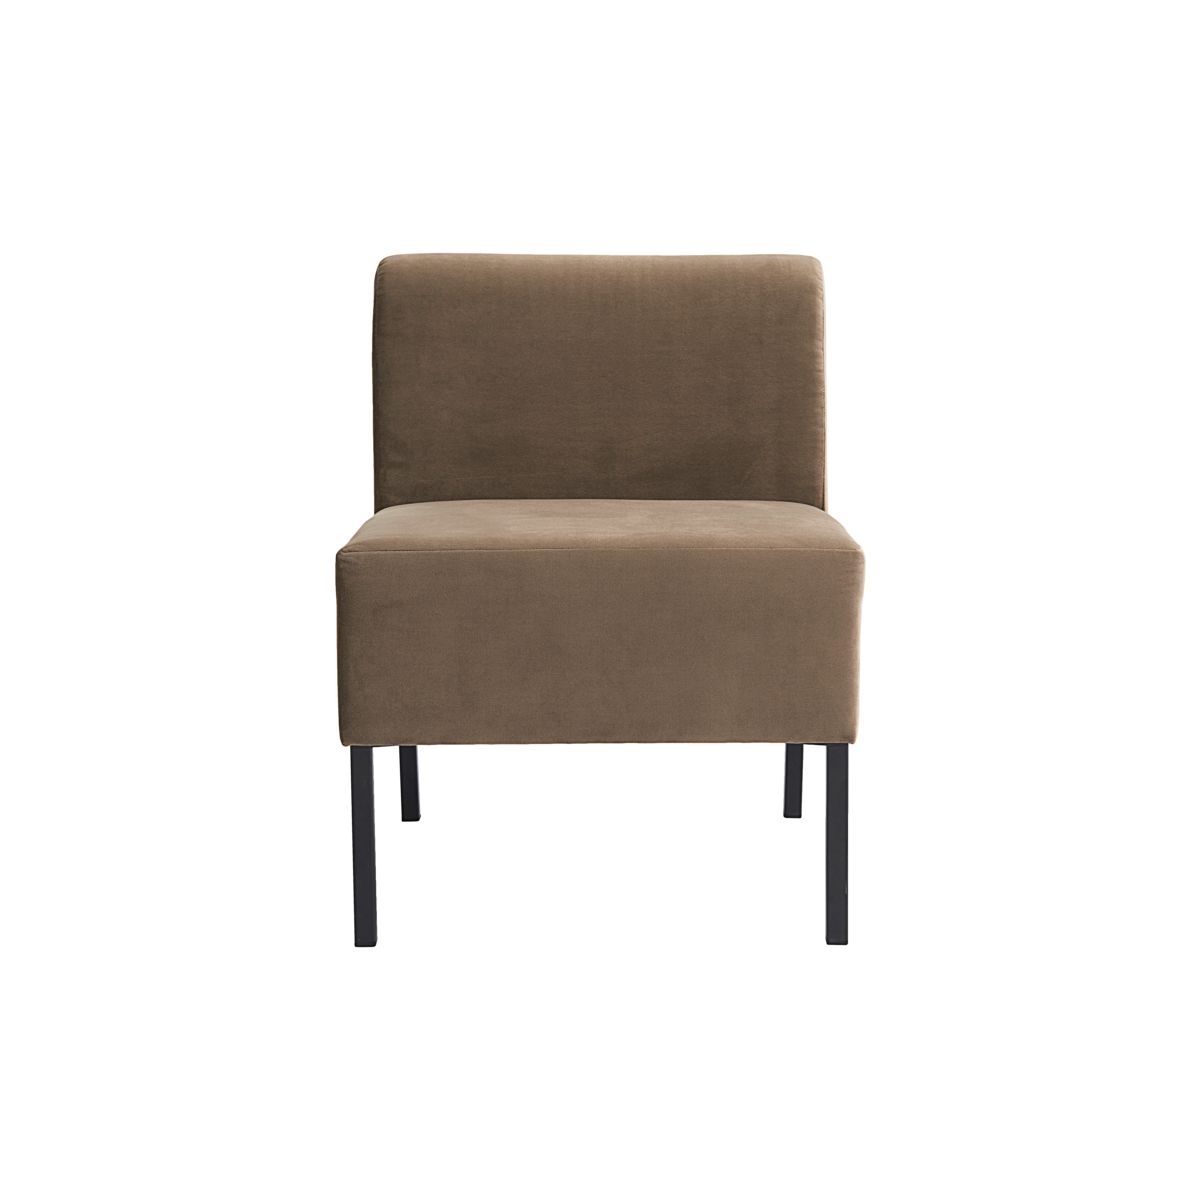 House Doctor - Soffa, 1 seater, Sand